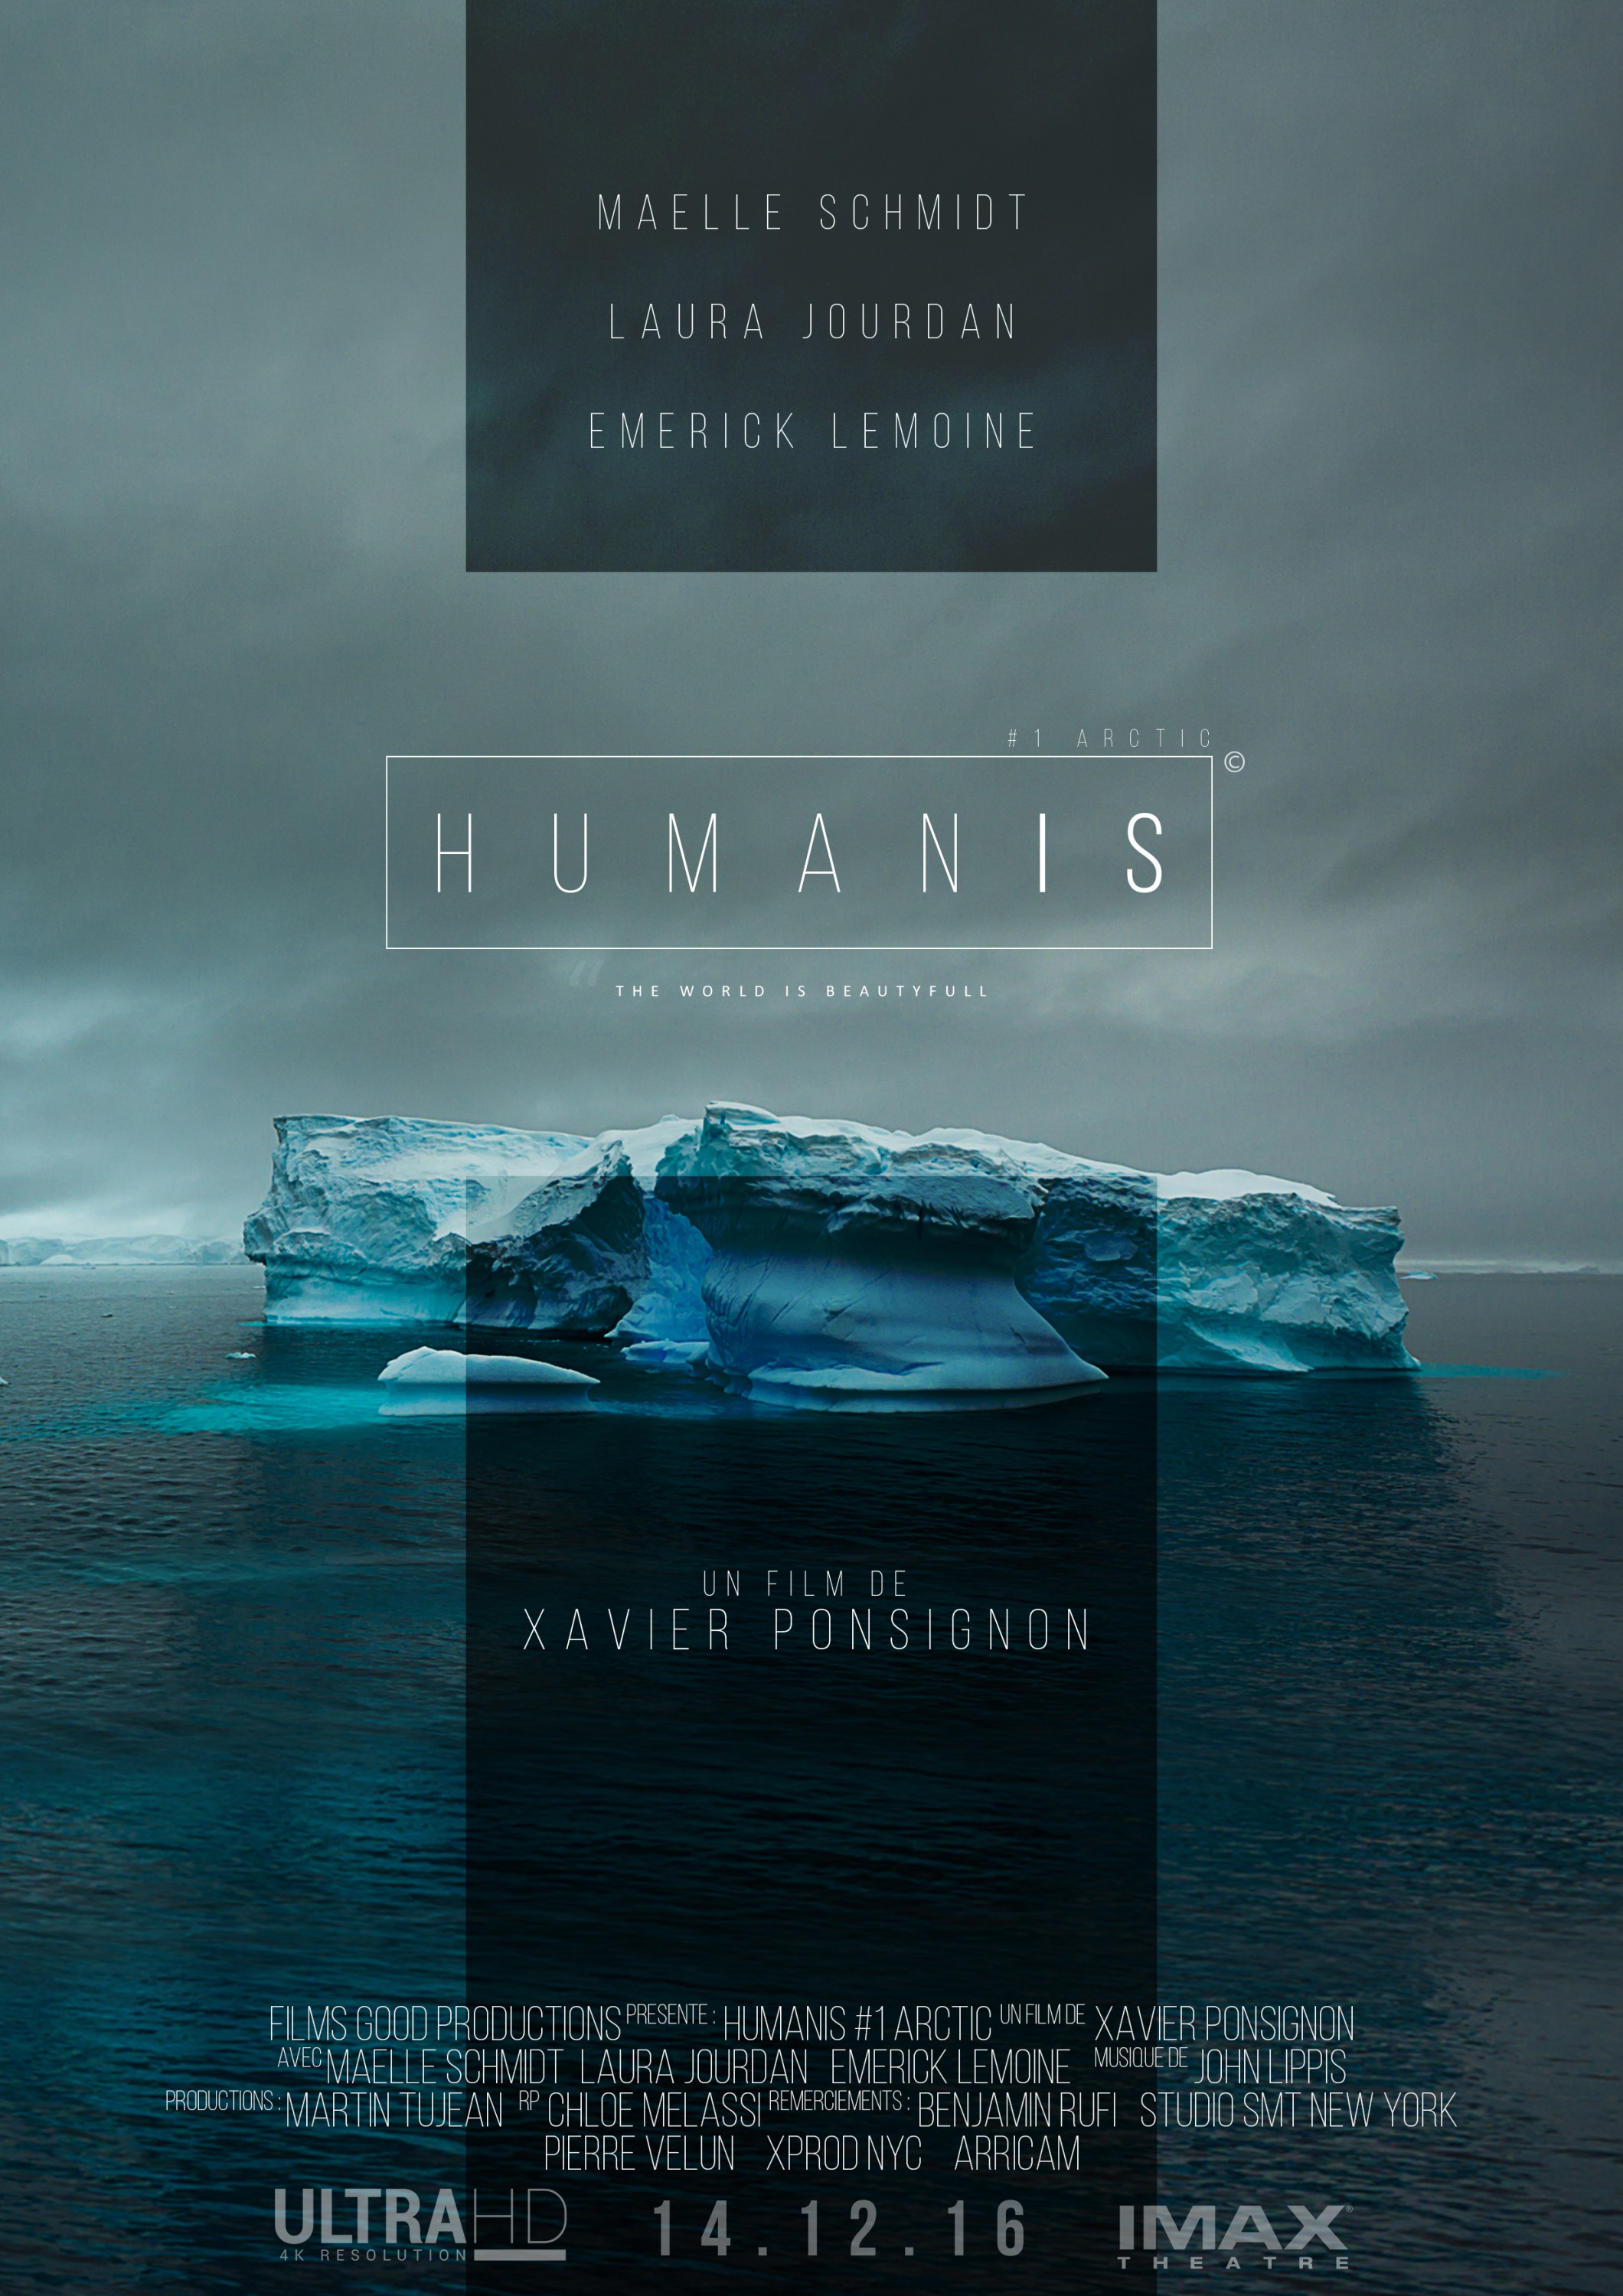 Mega Sized Movie Poster Image for Humanis, Artctic Adventure 